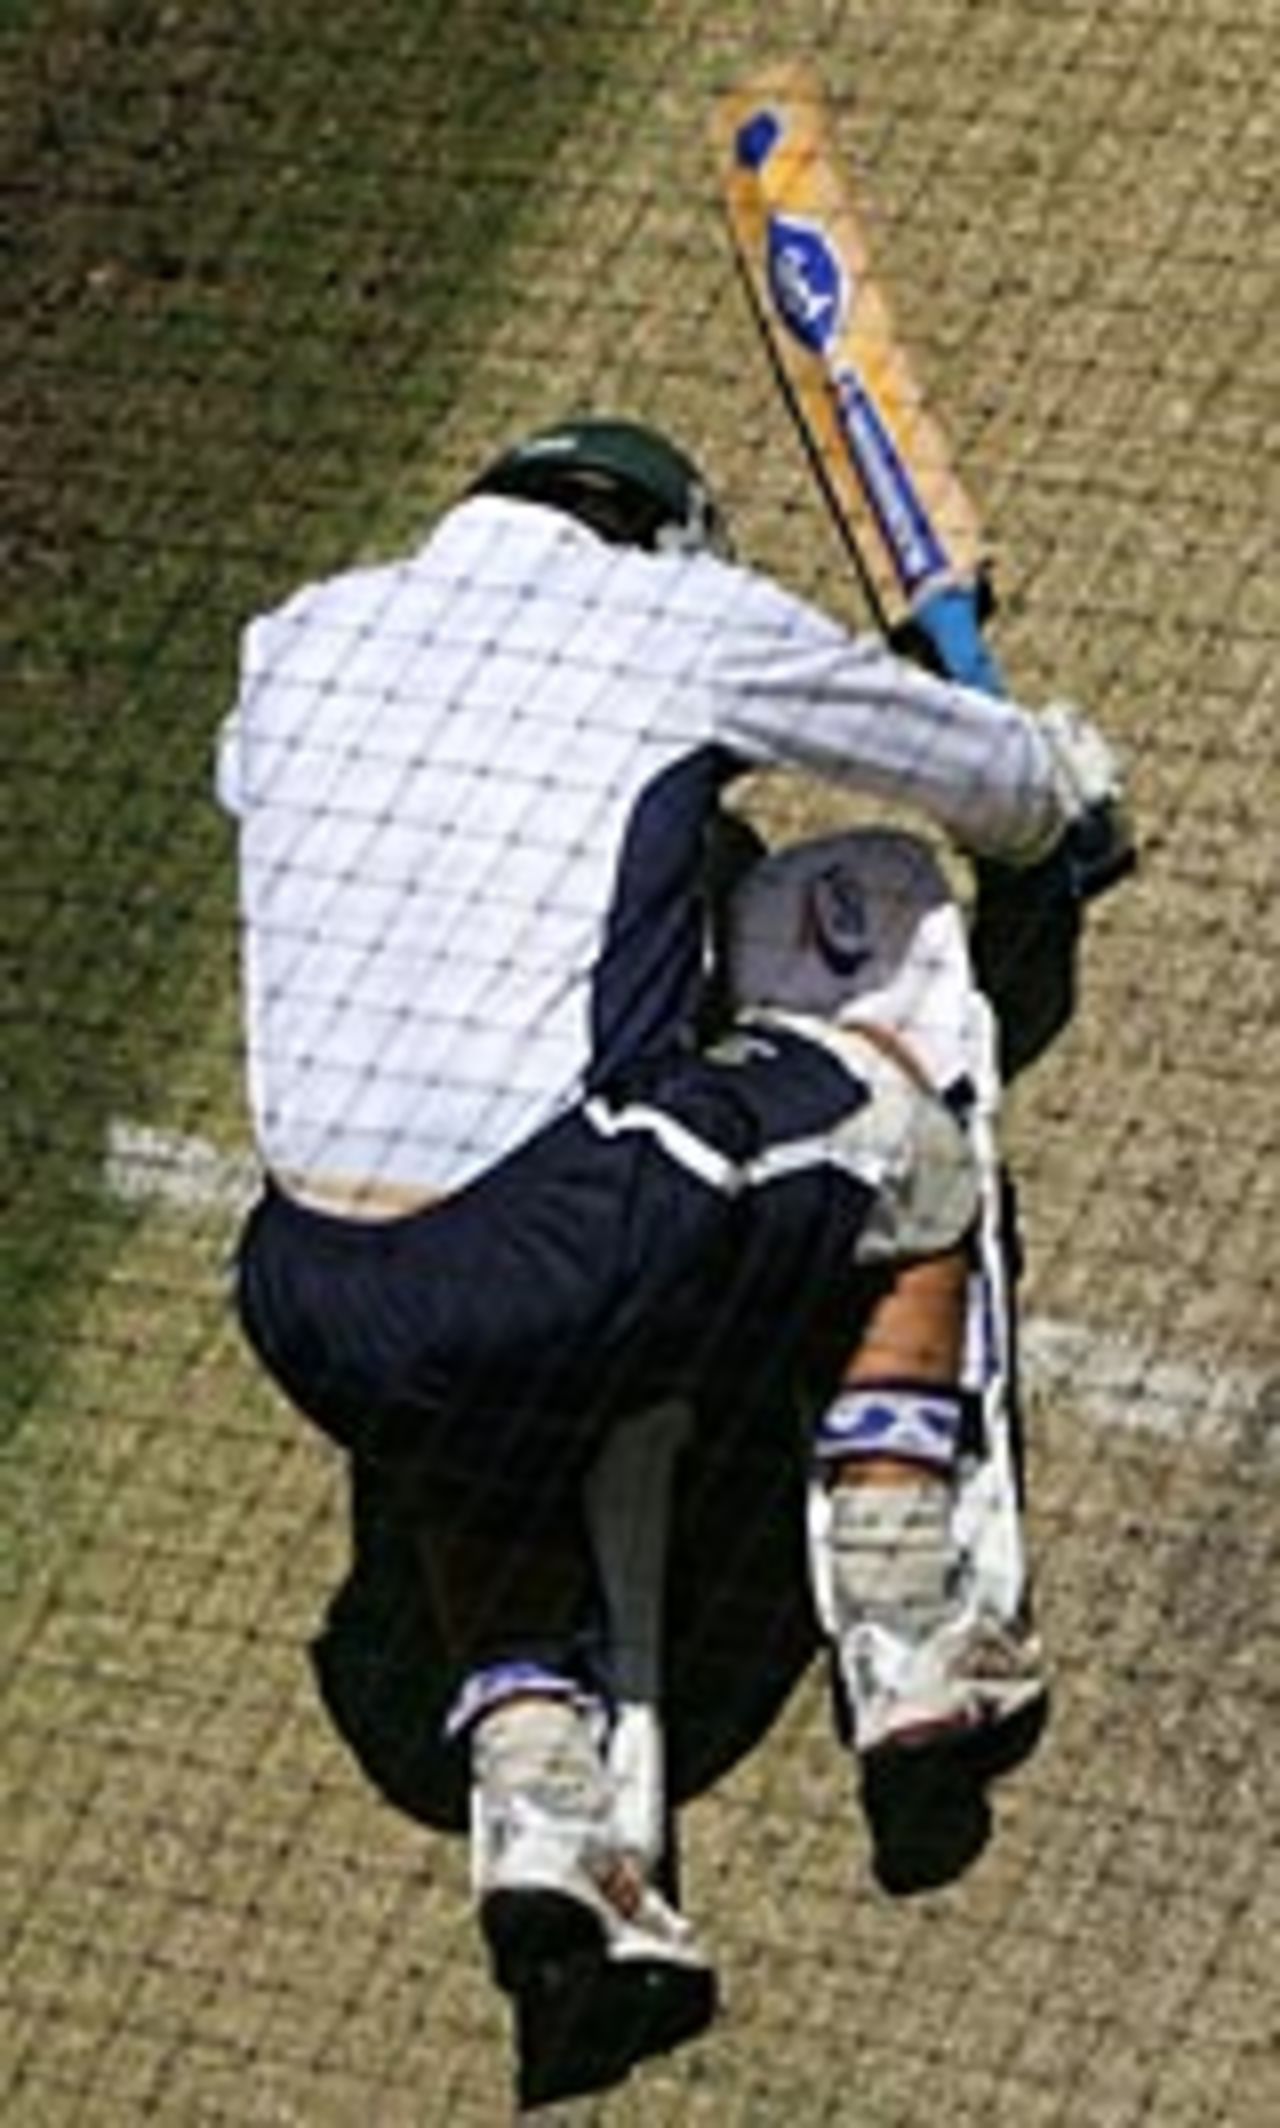 Justin Langer feels the pain after being felled by a bouncer in the nets at Perth, December 14, 2004